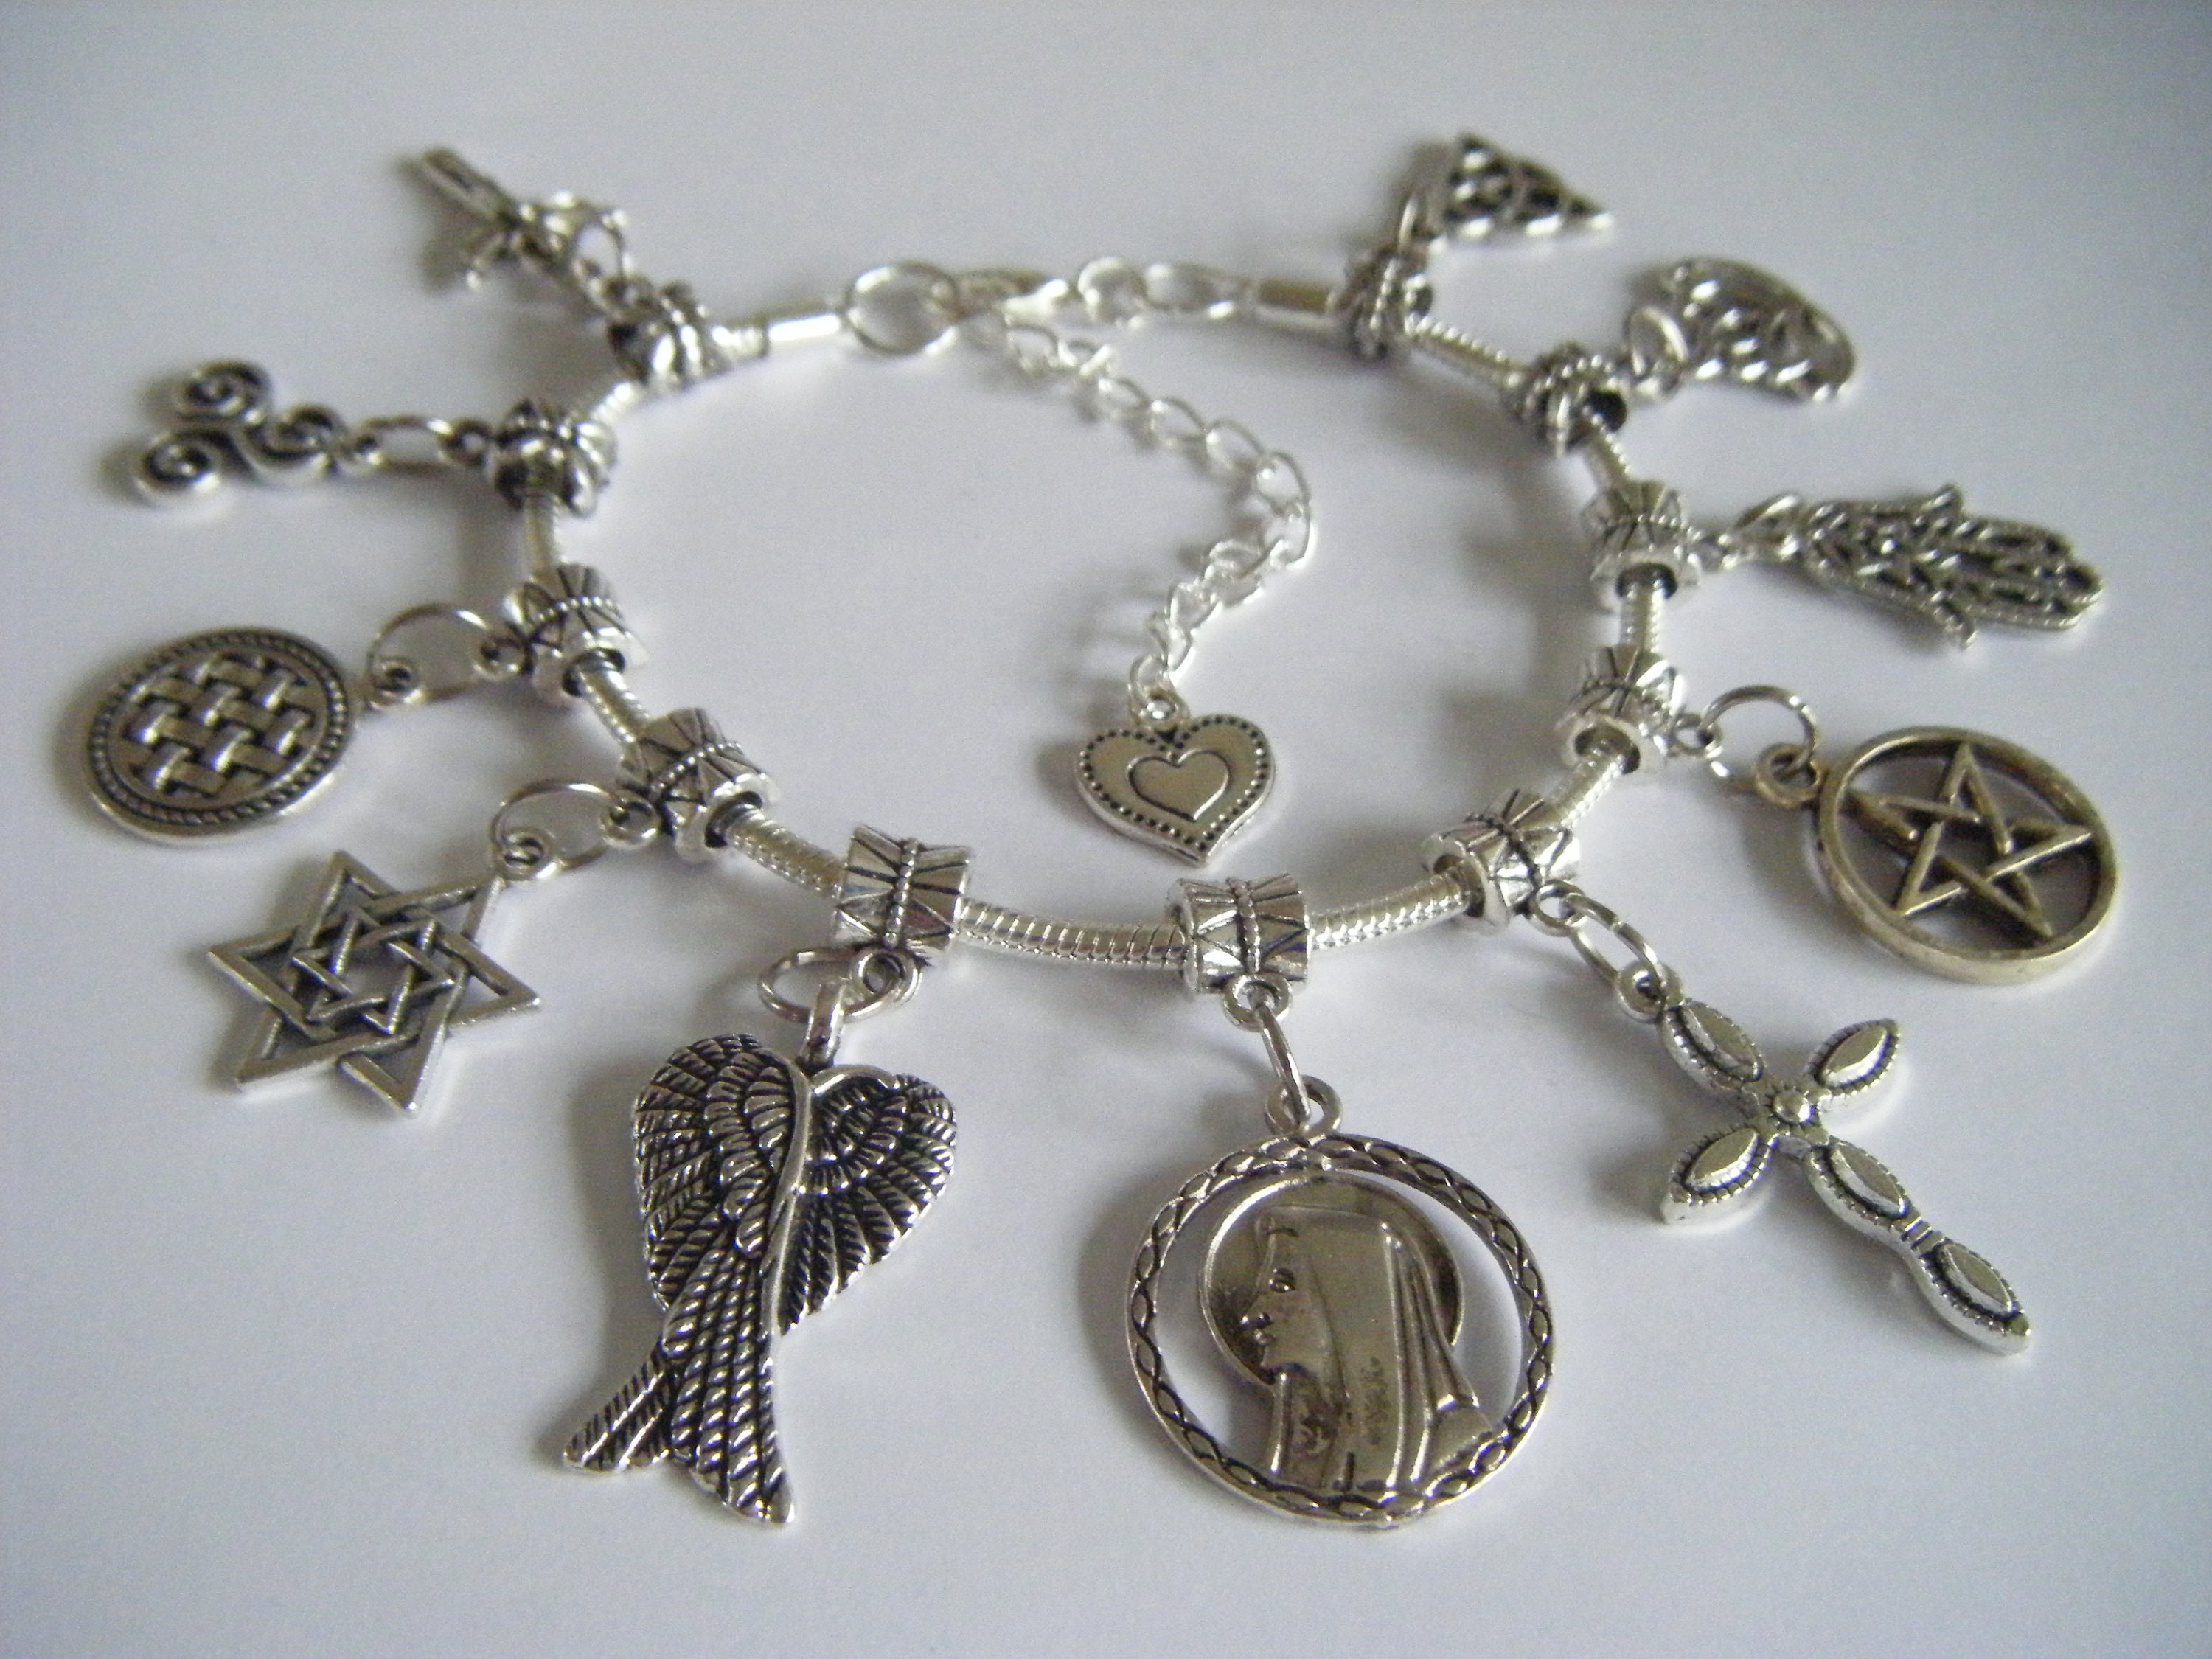 SUPERNATURAL Mary Winchester Protection Charm Bracelet Demon